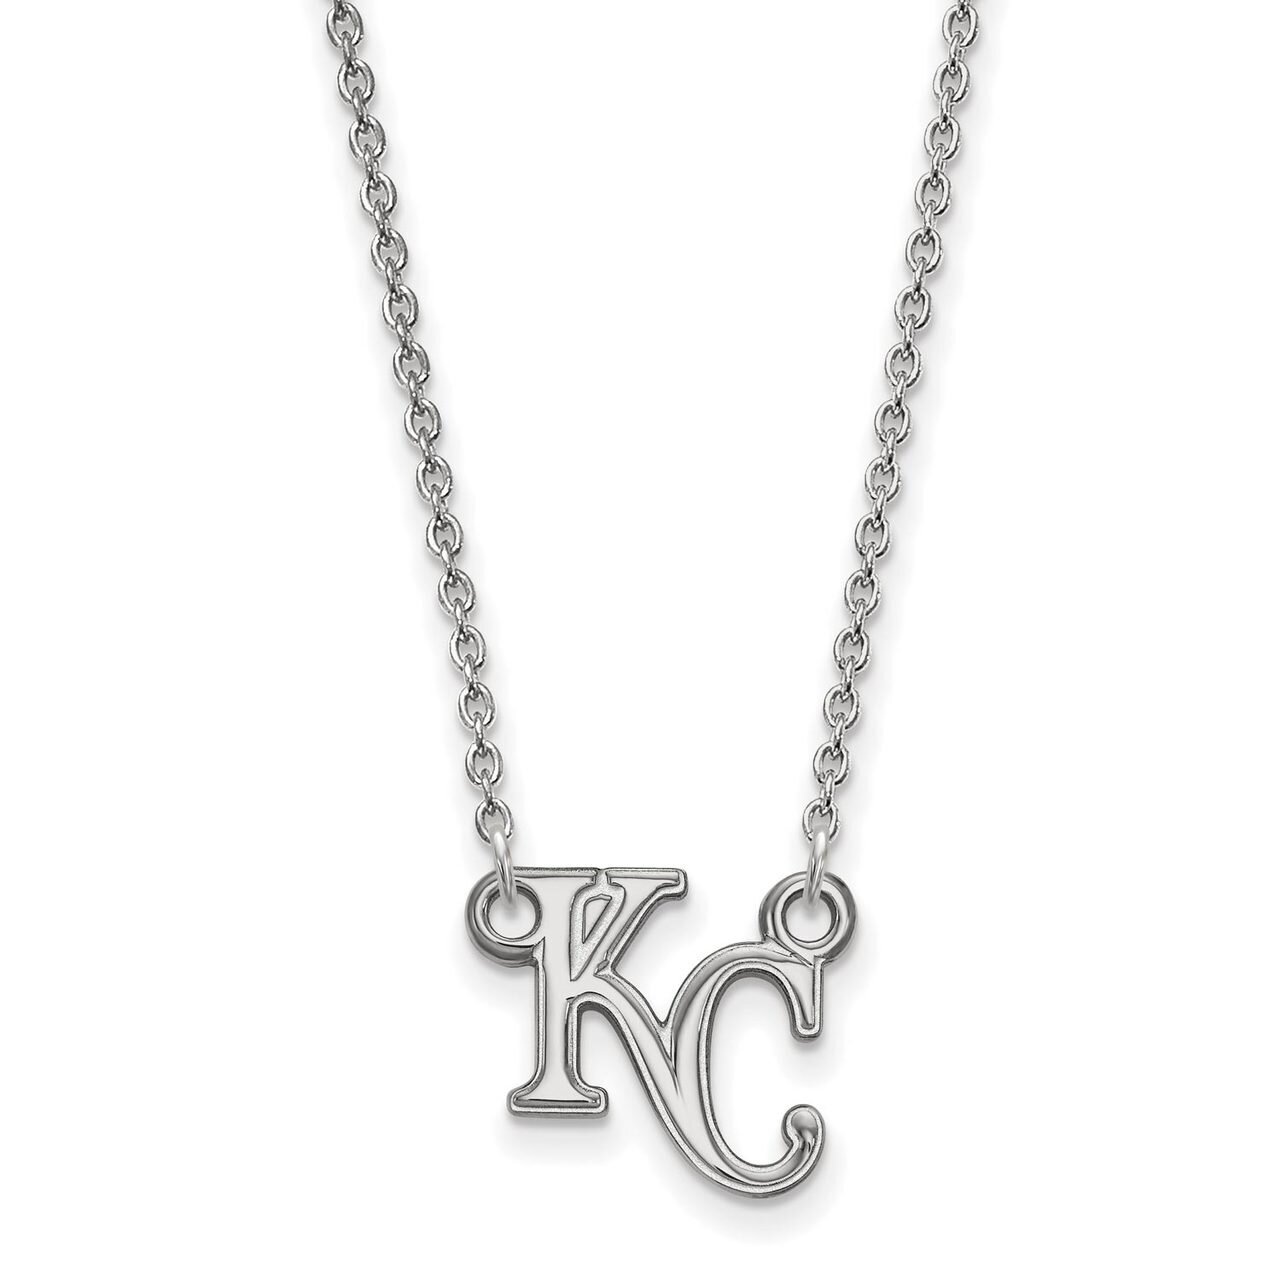 Kansas City Royals Small Pendant with Chain Necklace 14k White Gold 4W006ROY-18